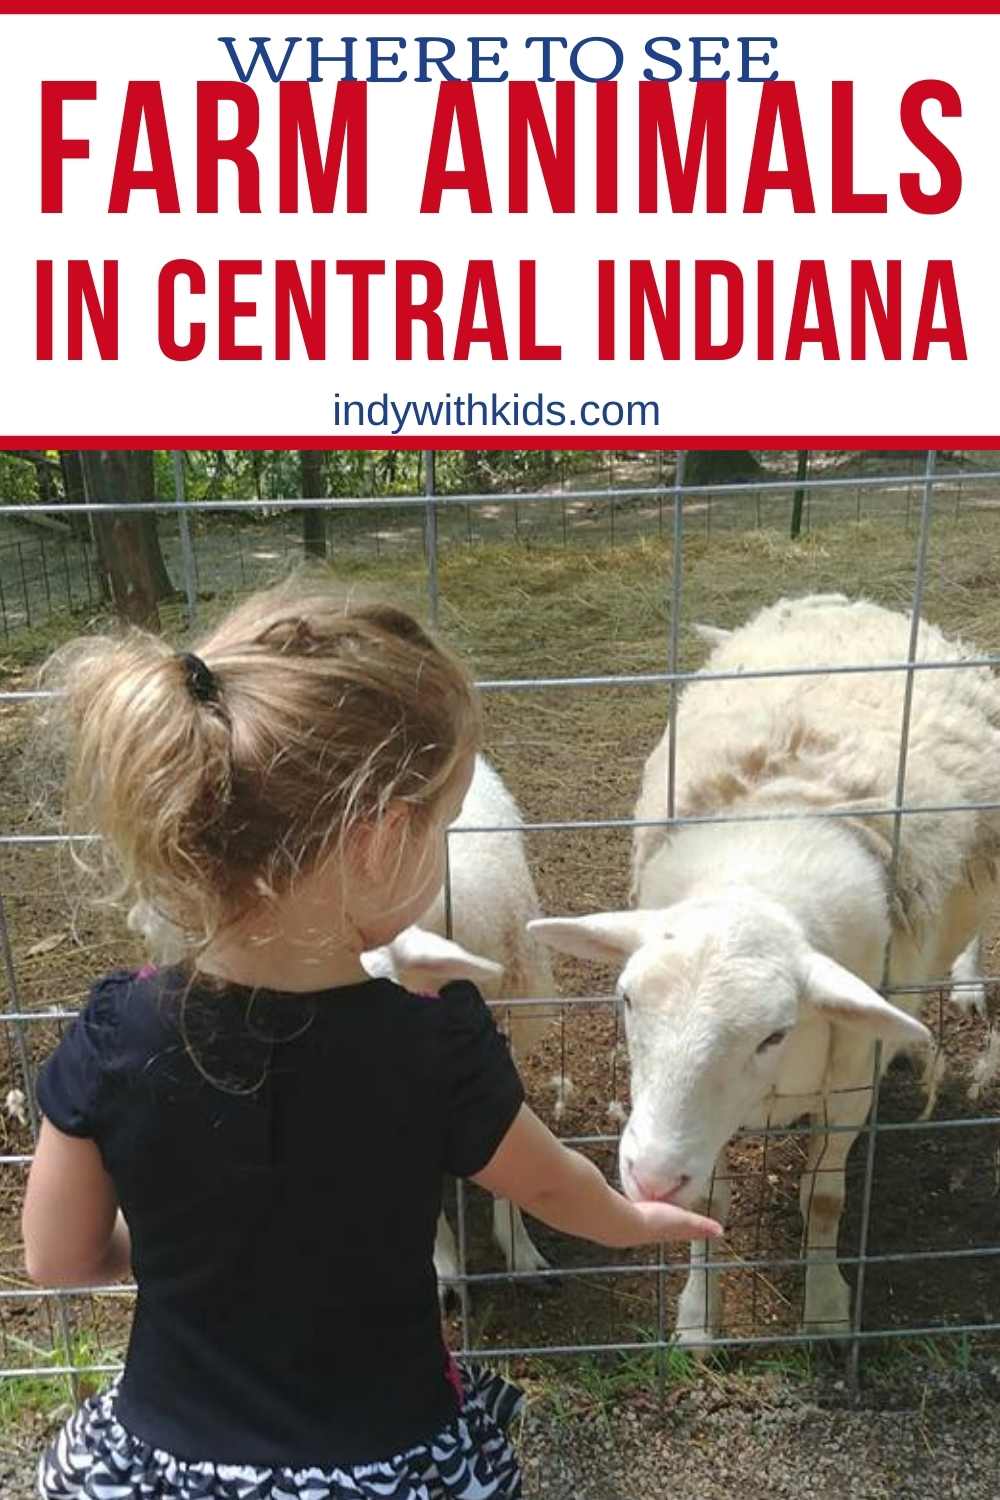 Places to Visit Farm Animals around Central Indiana